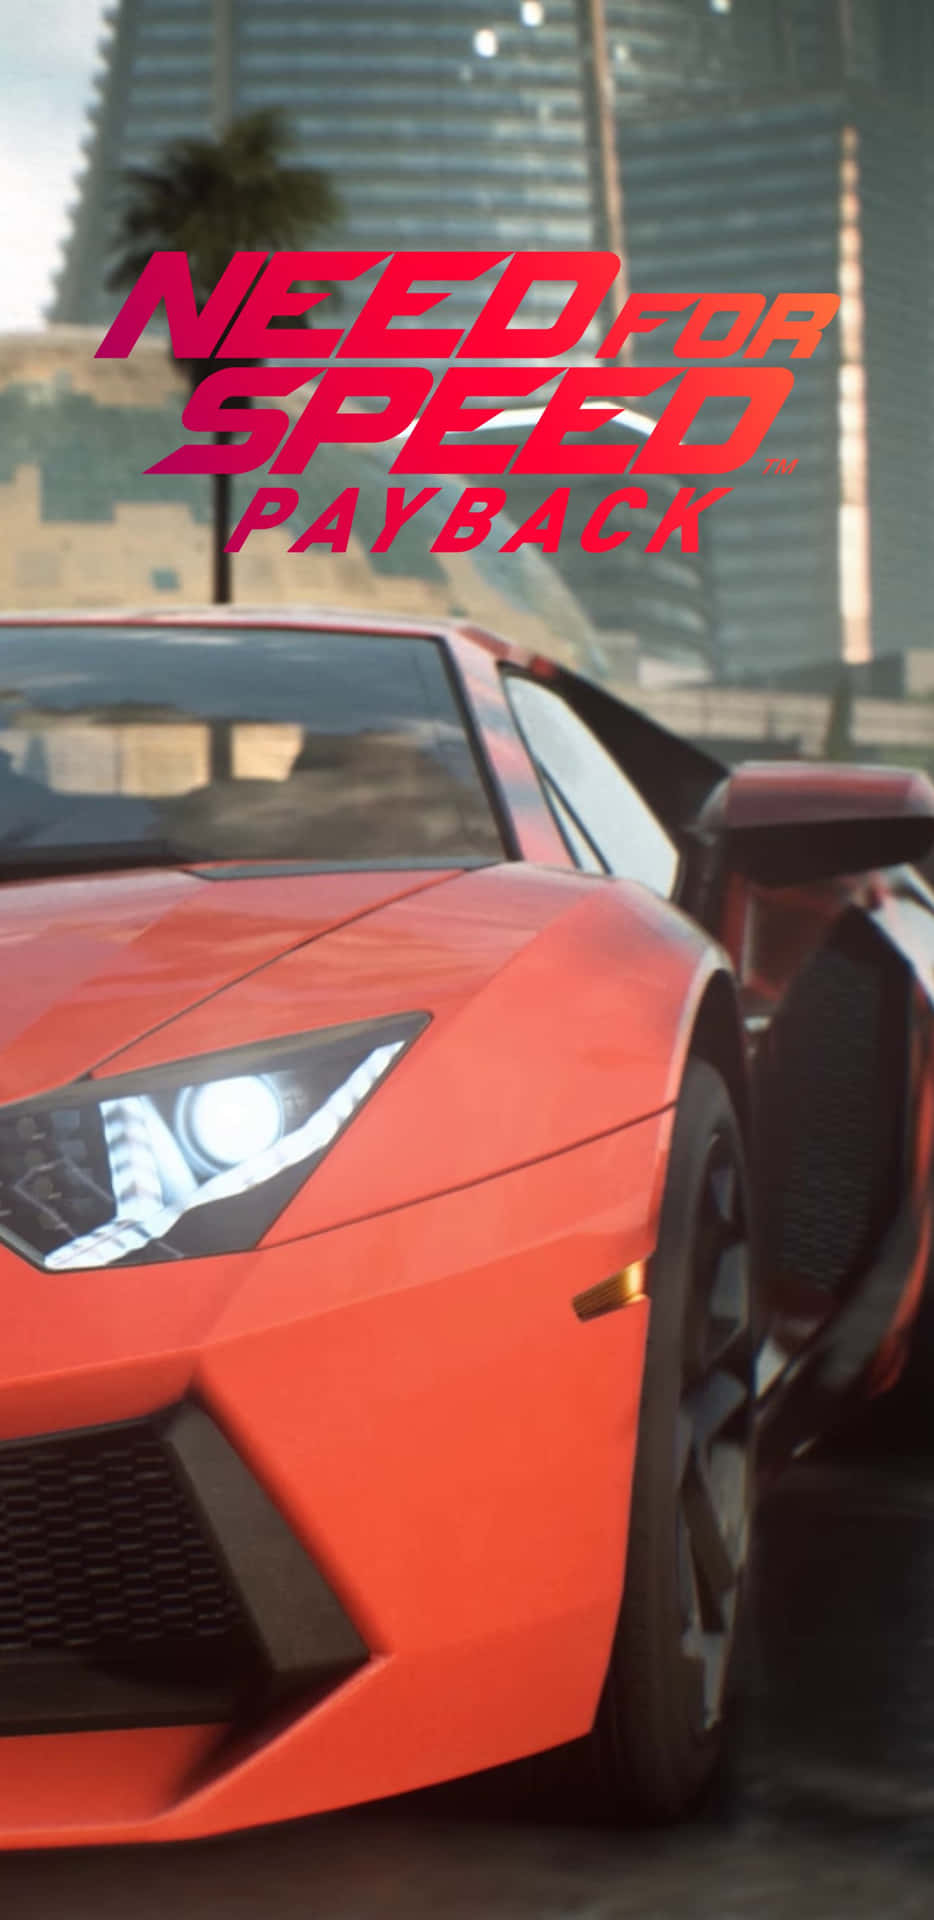 "Experience the thrills of Need For Speed Payback on the Pixel 3XL"